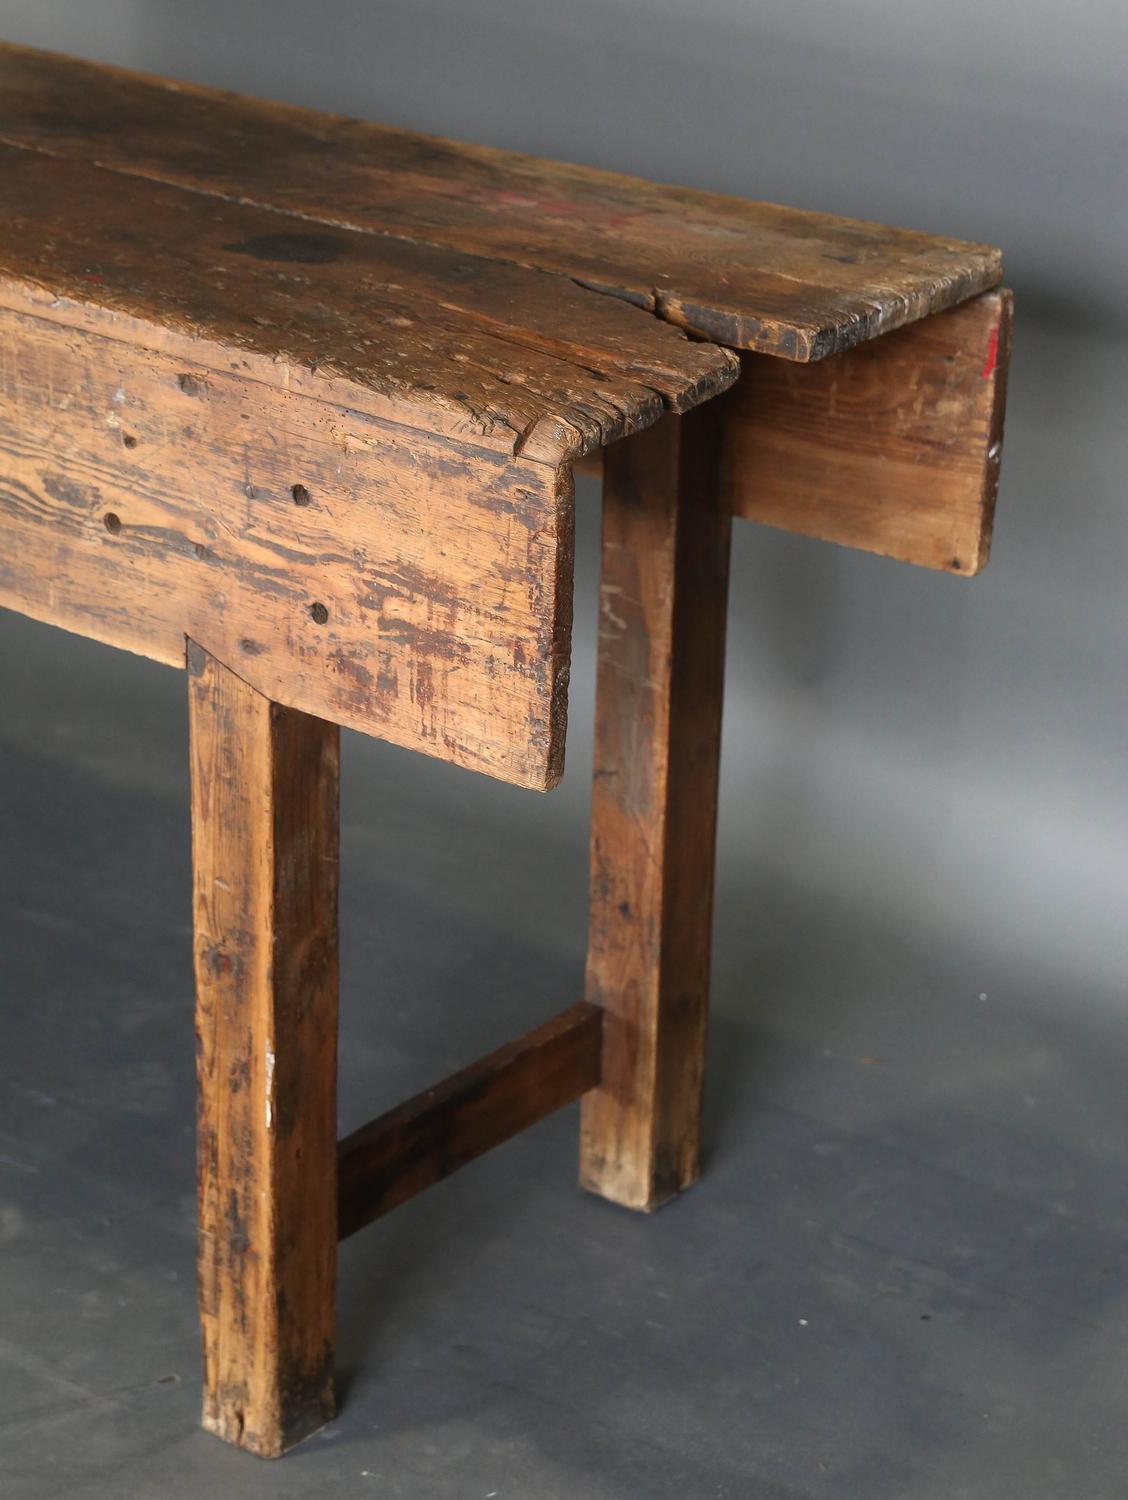 Antique 19th Century French Workbench For Sale at 1stdibs